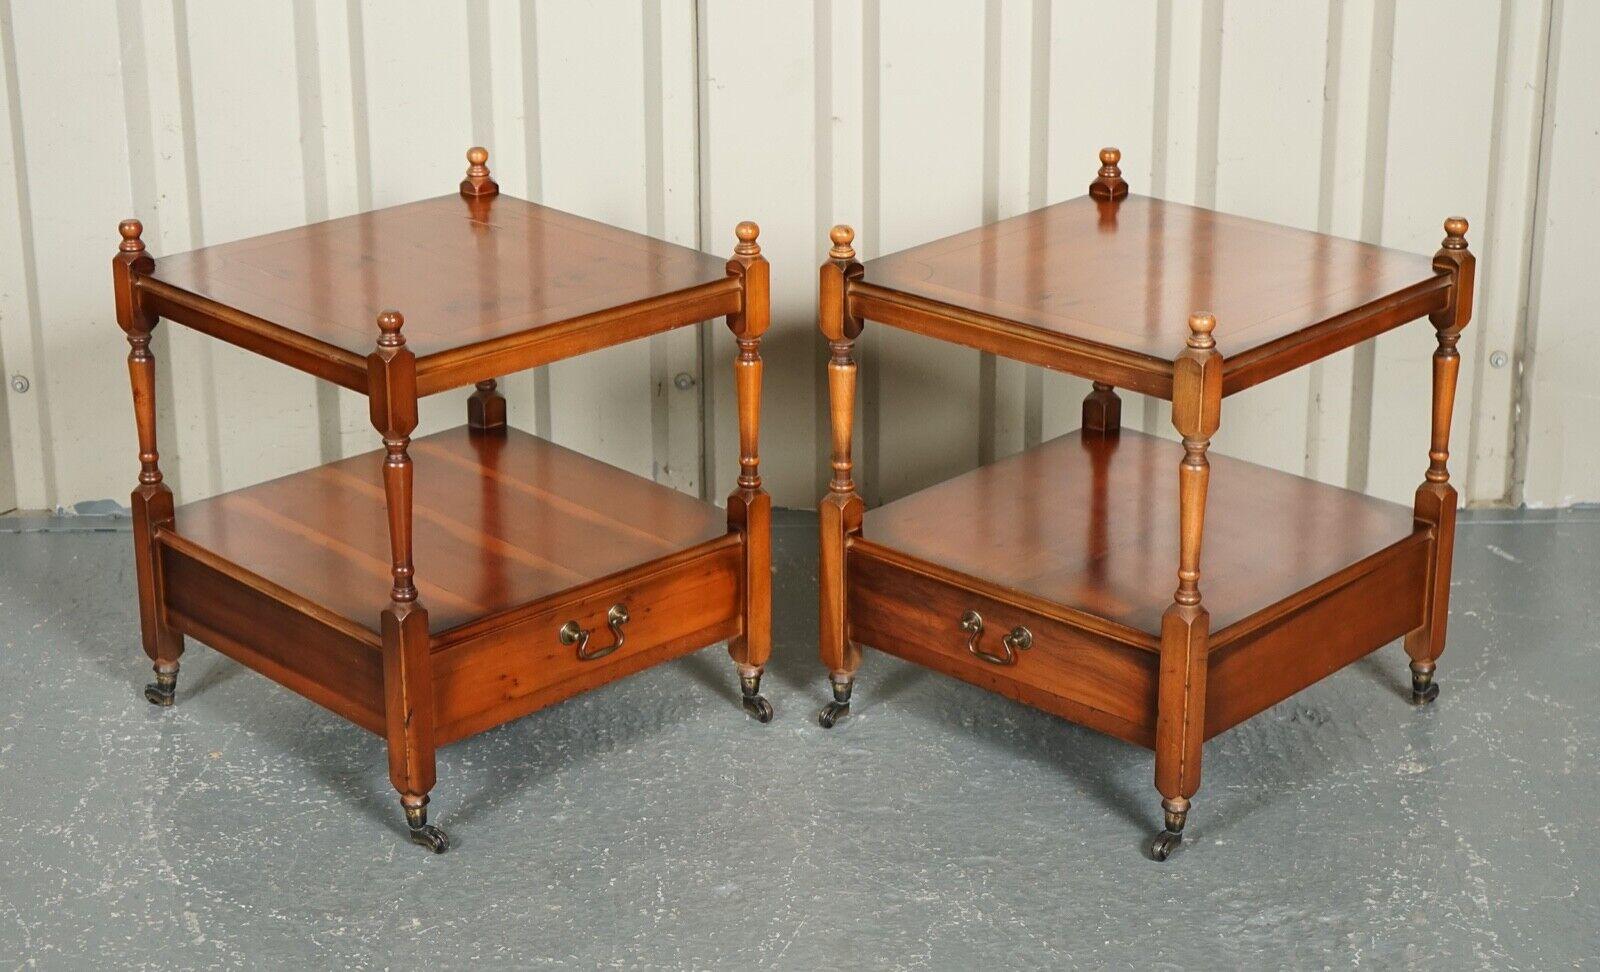 We are excited to present this Beautiful Vintage, Flamed Yew Wood Pair Of Nightstands and End Side Lamp Tables.

They are a very well-made and solid pair.

We have lightly restored this by giving it a hand clean, waxed and polishing from top to